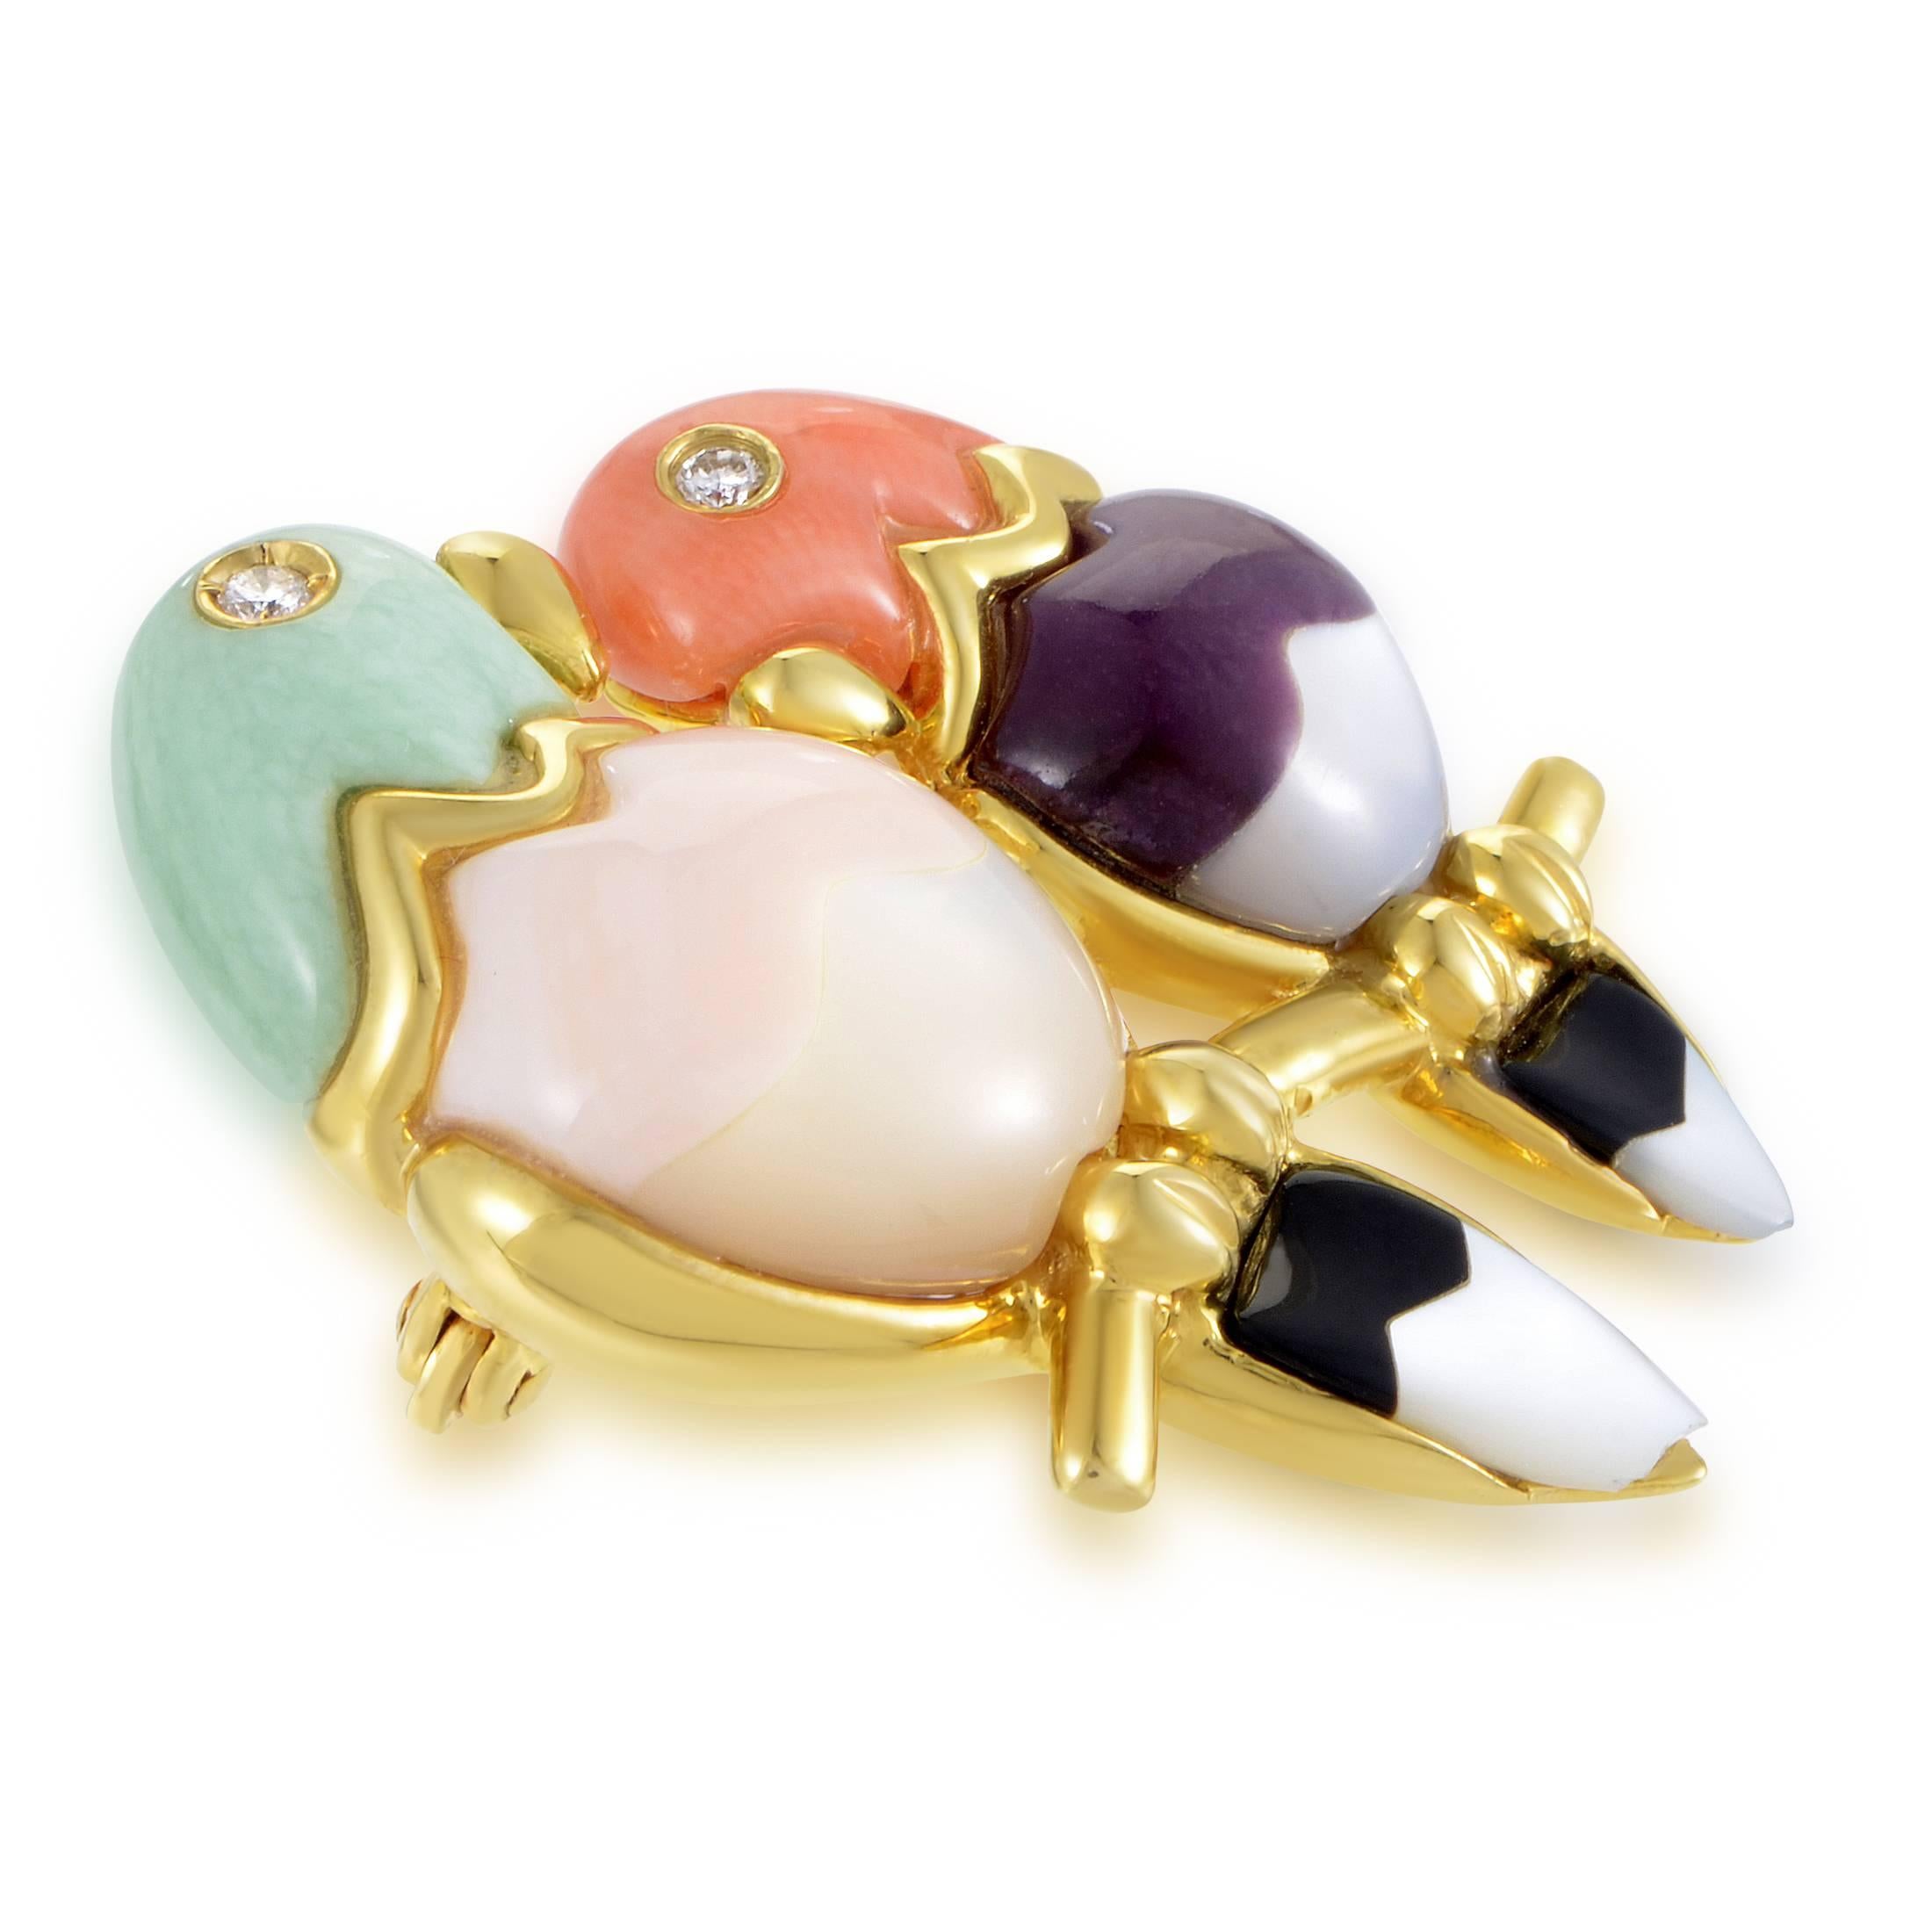 Vivid colors and tender nature of this wonderful brooch from Asch Grossbart brilliantly depict the beauty of birds, with the marvelous combination of delightful mother of pearl, adorable coral, splendid green jade and stunning onyx stones placed